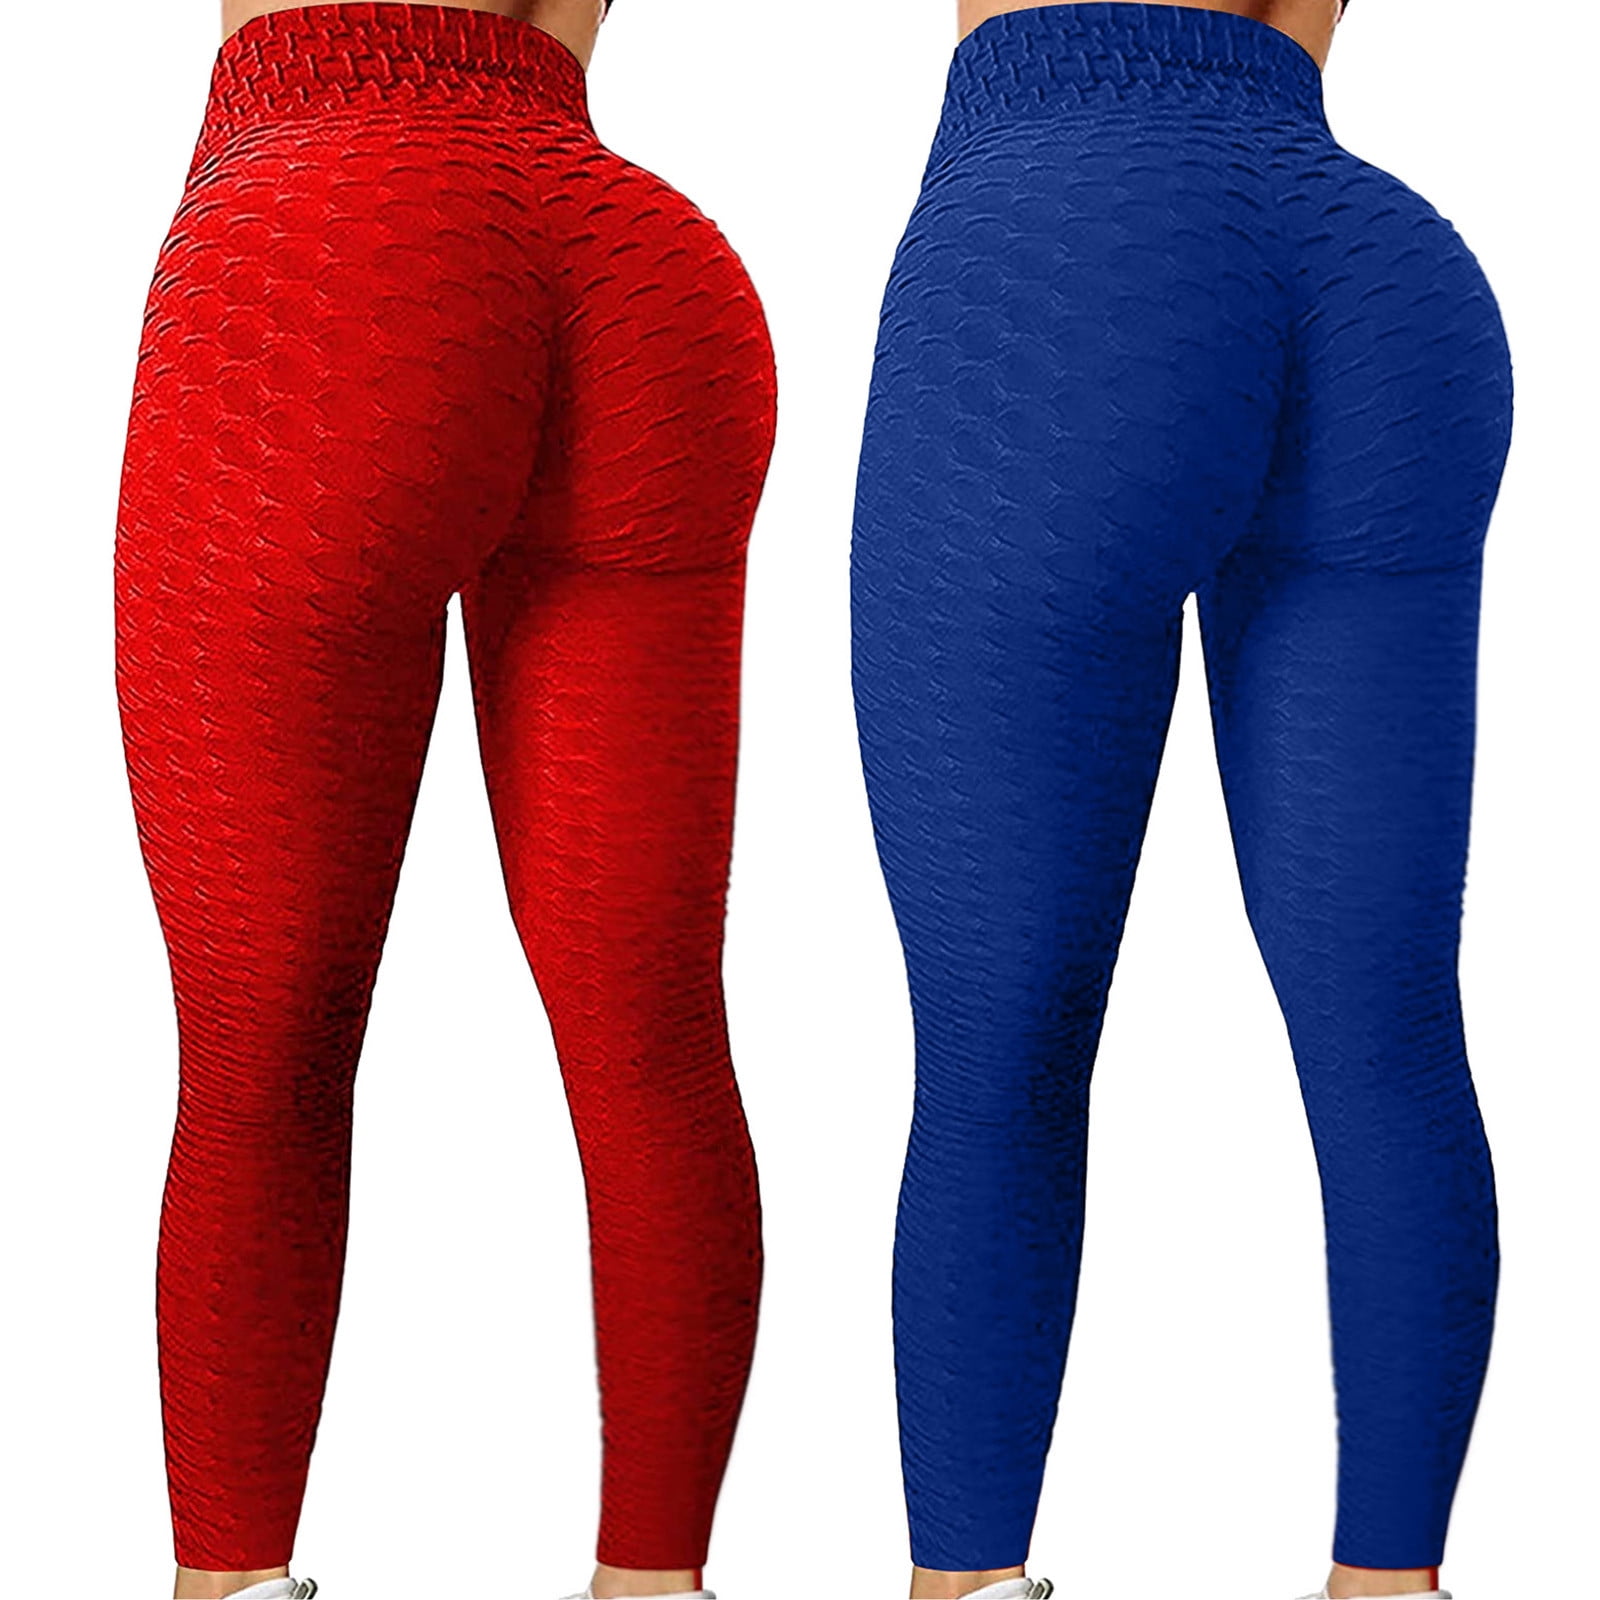 Womens High Waist Yoga Oner Active Leggings And Top Set Athletic